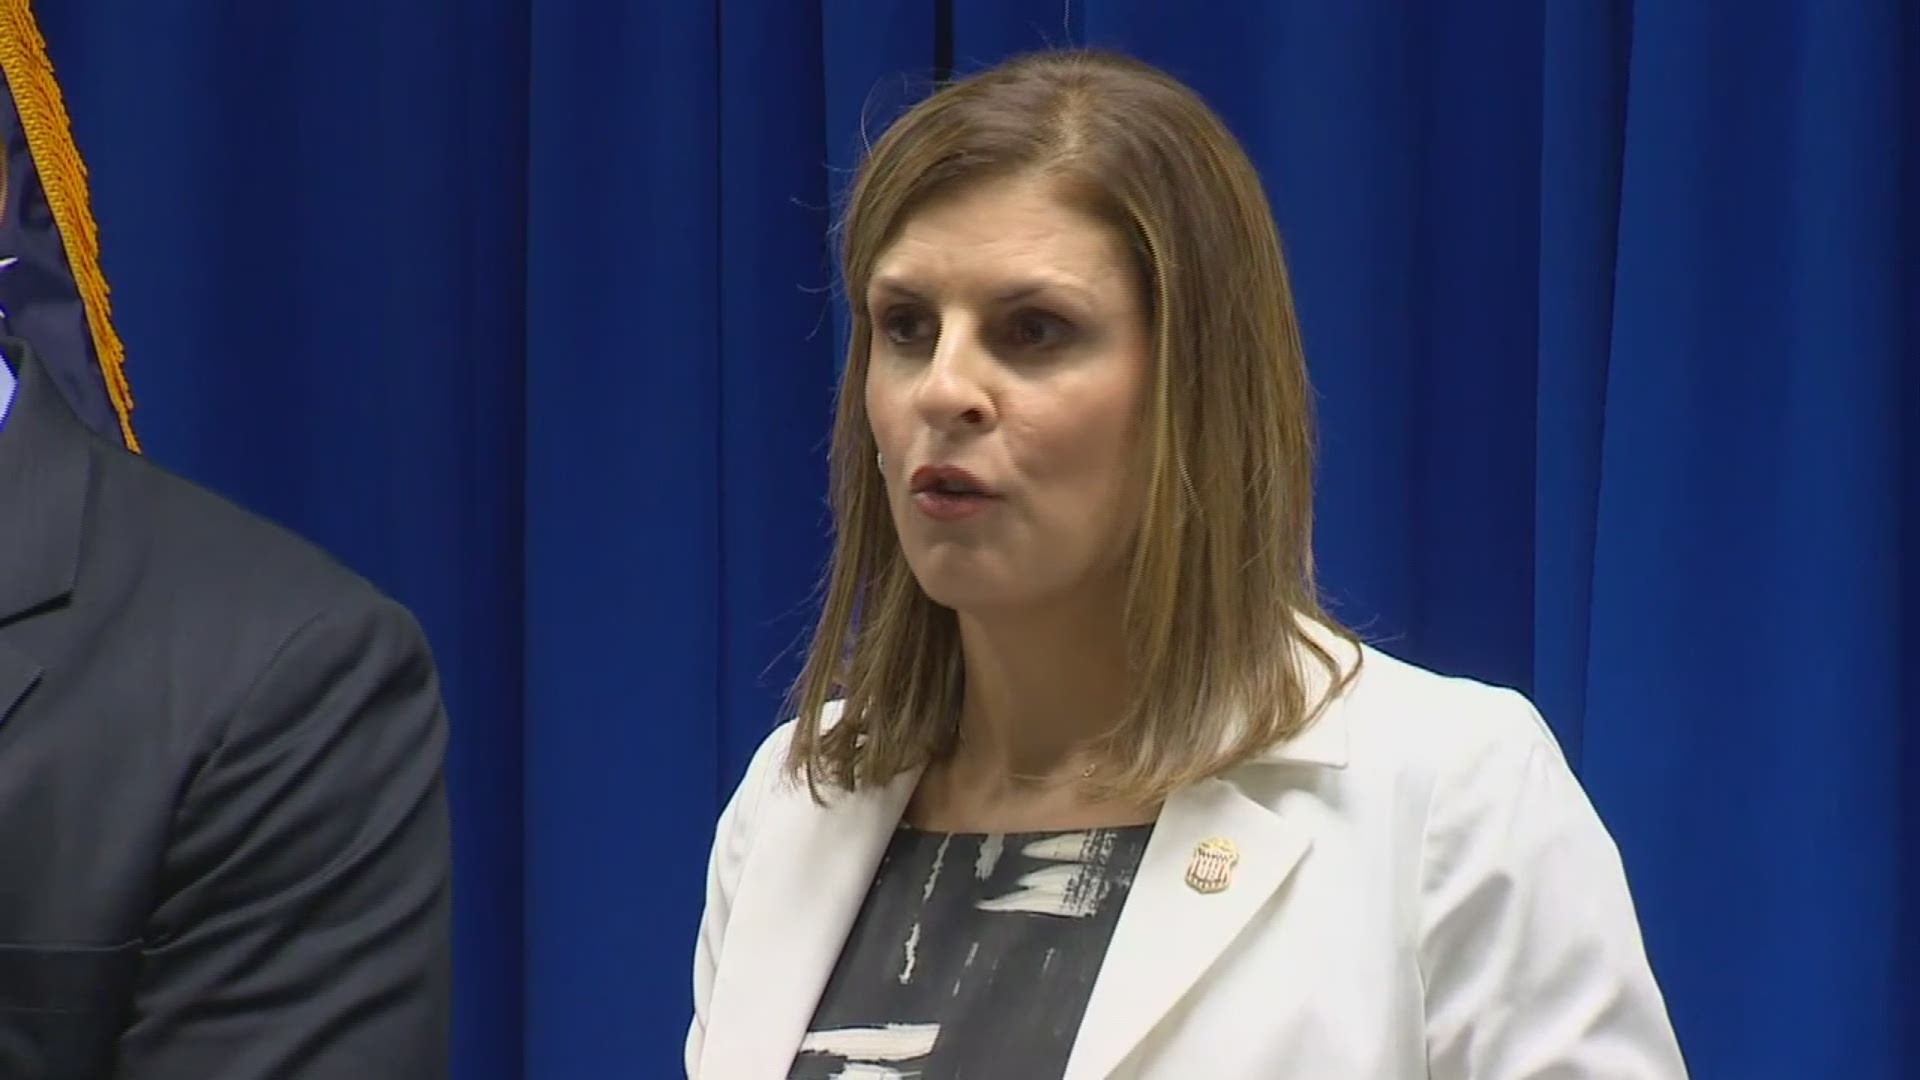 Erin Nealy Cox, the U.S. Attorney for the Northern District of Texas, details the charges against now-resigned Dallas Mayor Pro Tem Dwaine Caraway. WFAA.com